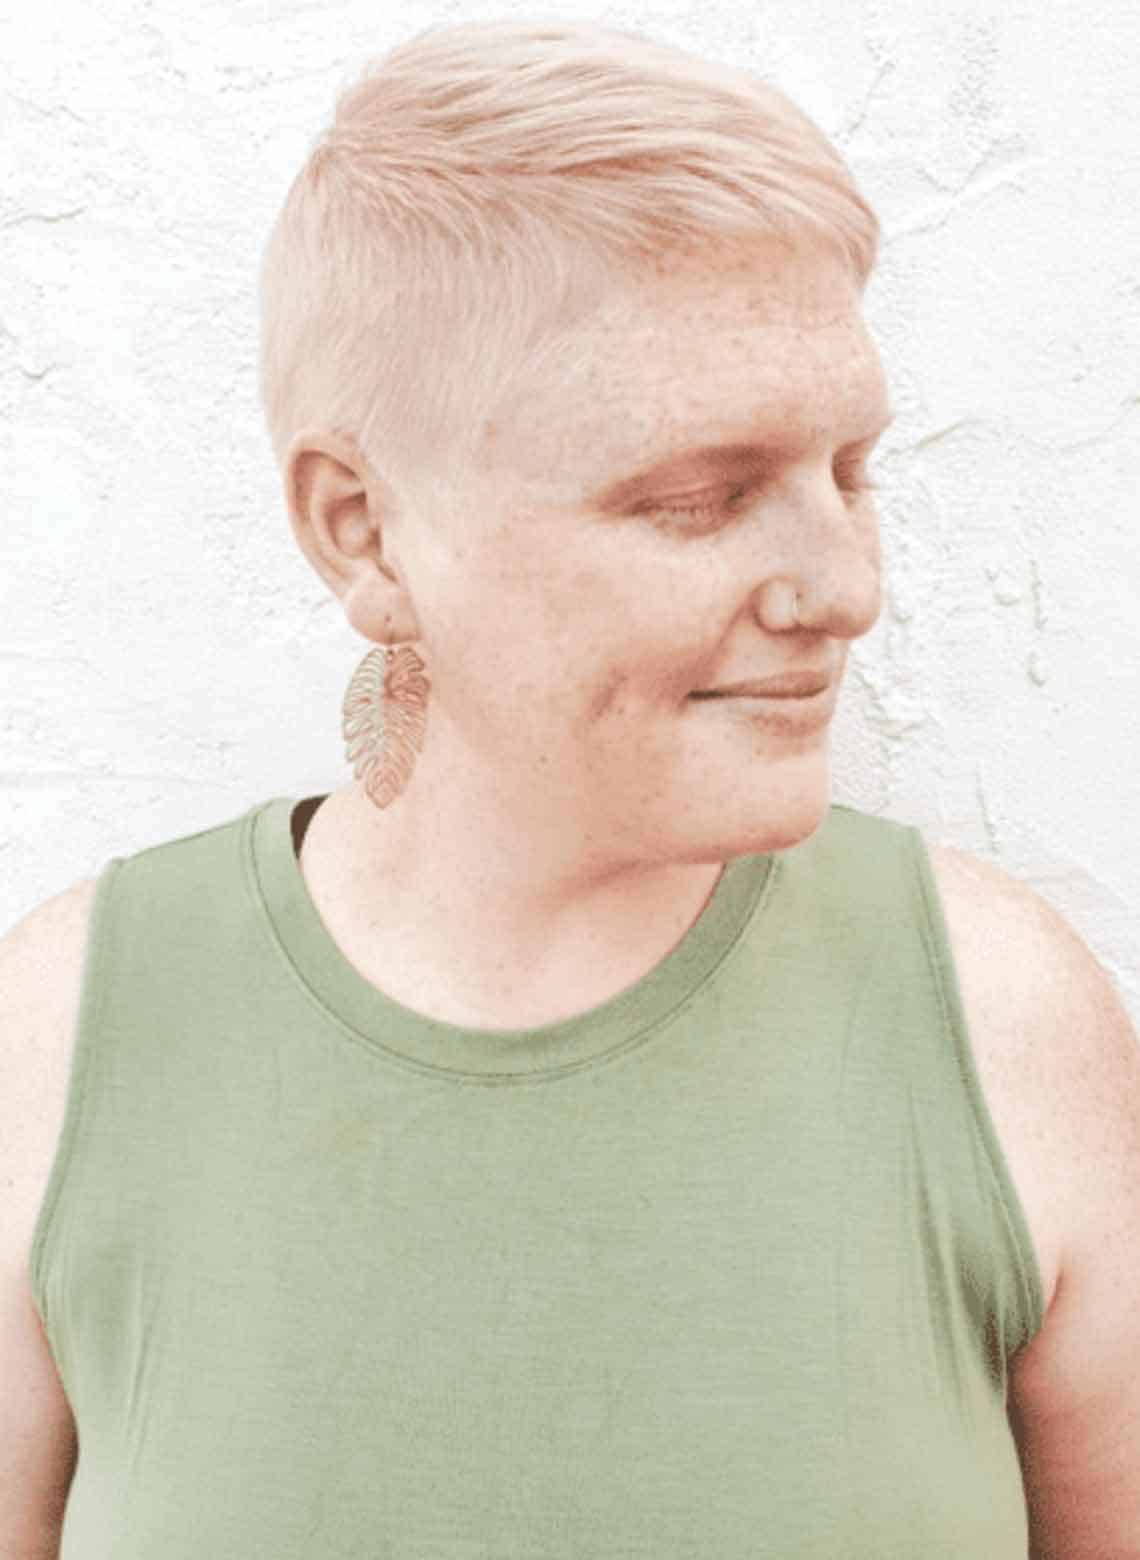 person wearing green tank top looking to the side with eyes closed, hair is blonde with a pixie cut